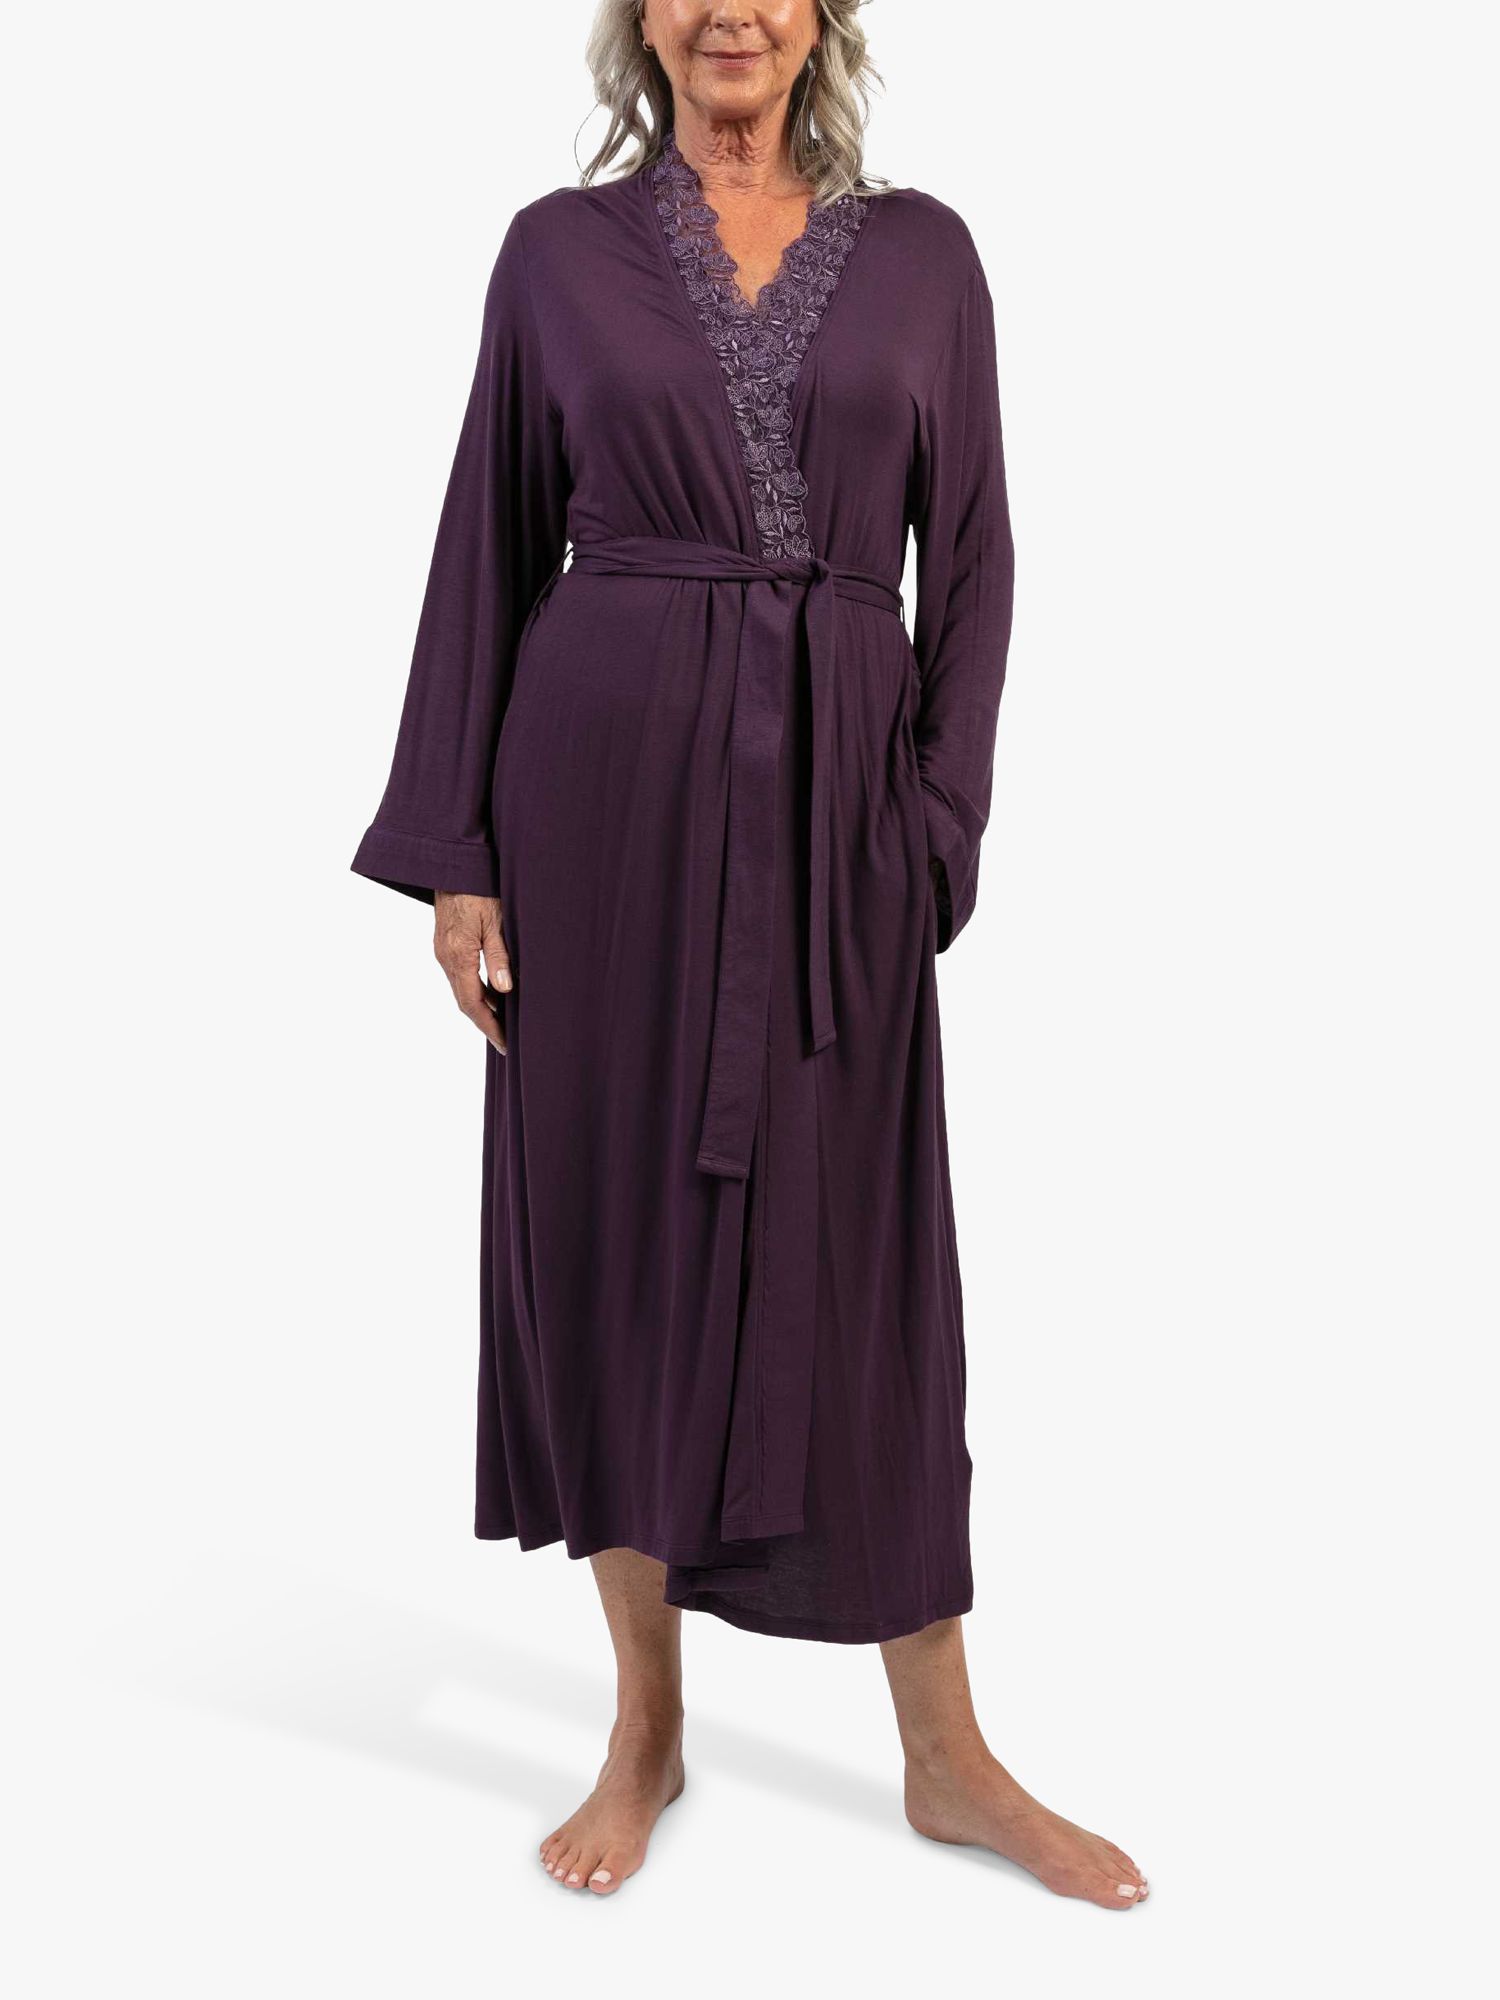 Nora Rose by Cyberjammies Maeve Lace Detail Jersey Knit Dressing Gown